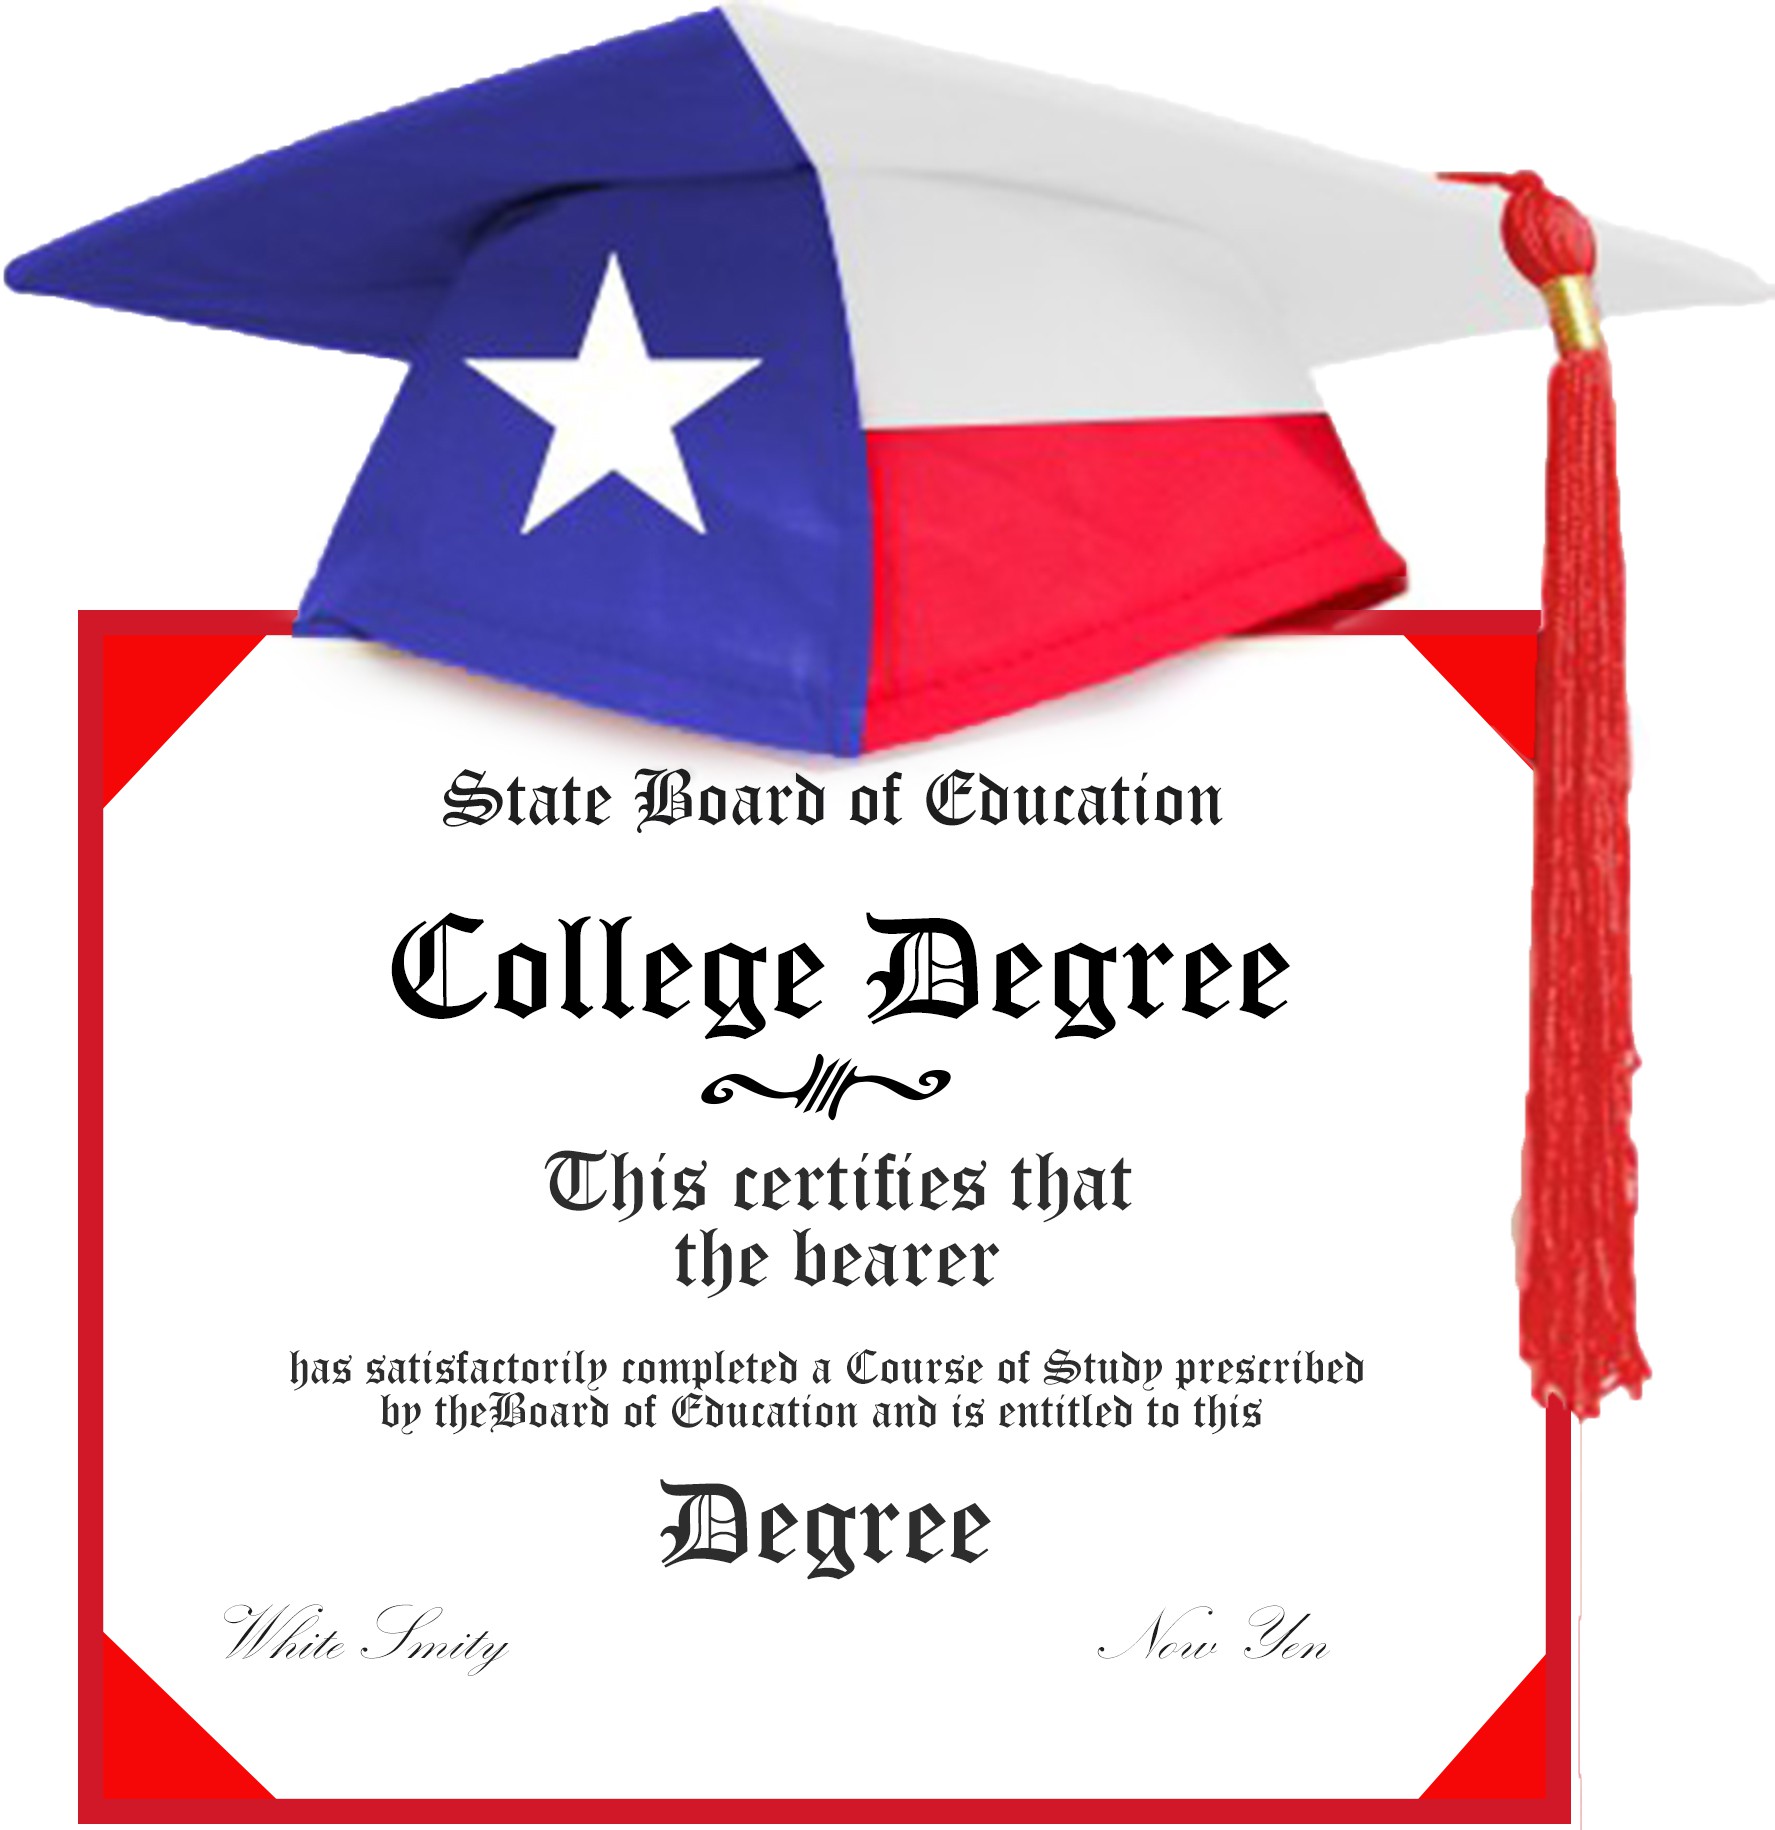 Texas A&M University Central College Degree